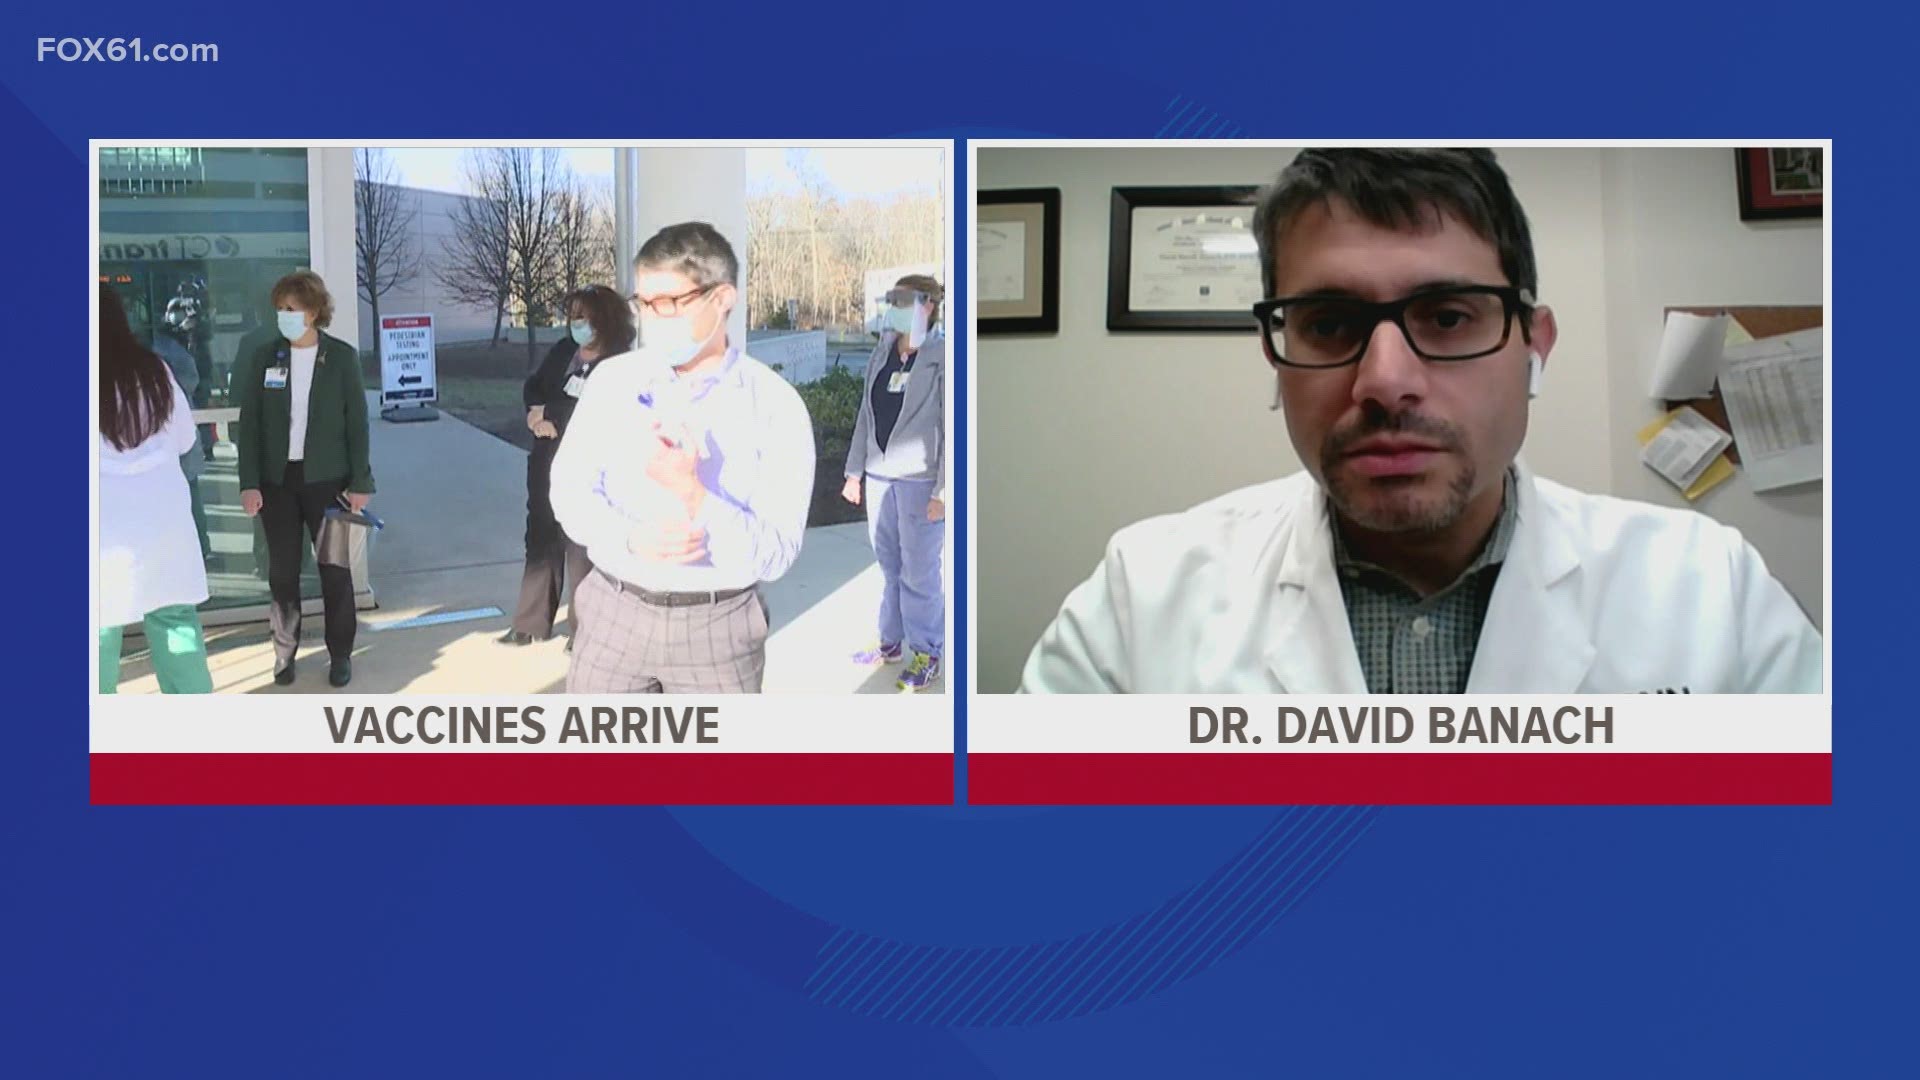 There is some hesitancy when it comes to the COVID-19 vaccine. Dr. David Banach from UConn health discusses what it was like receiving the vaccine